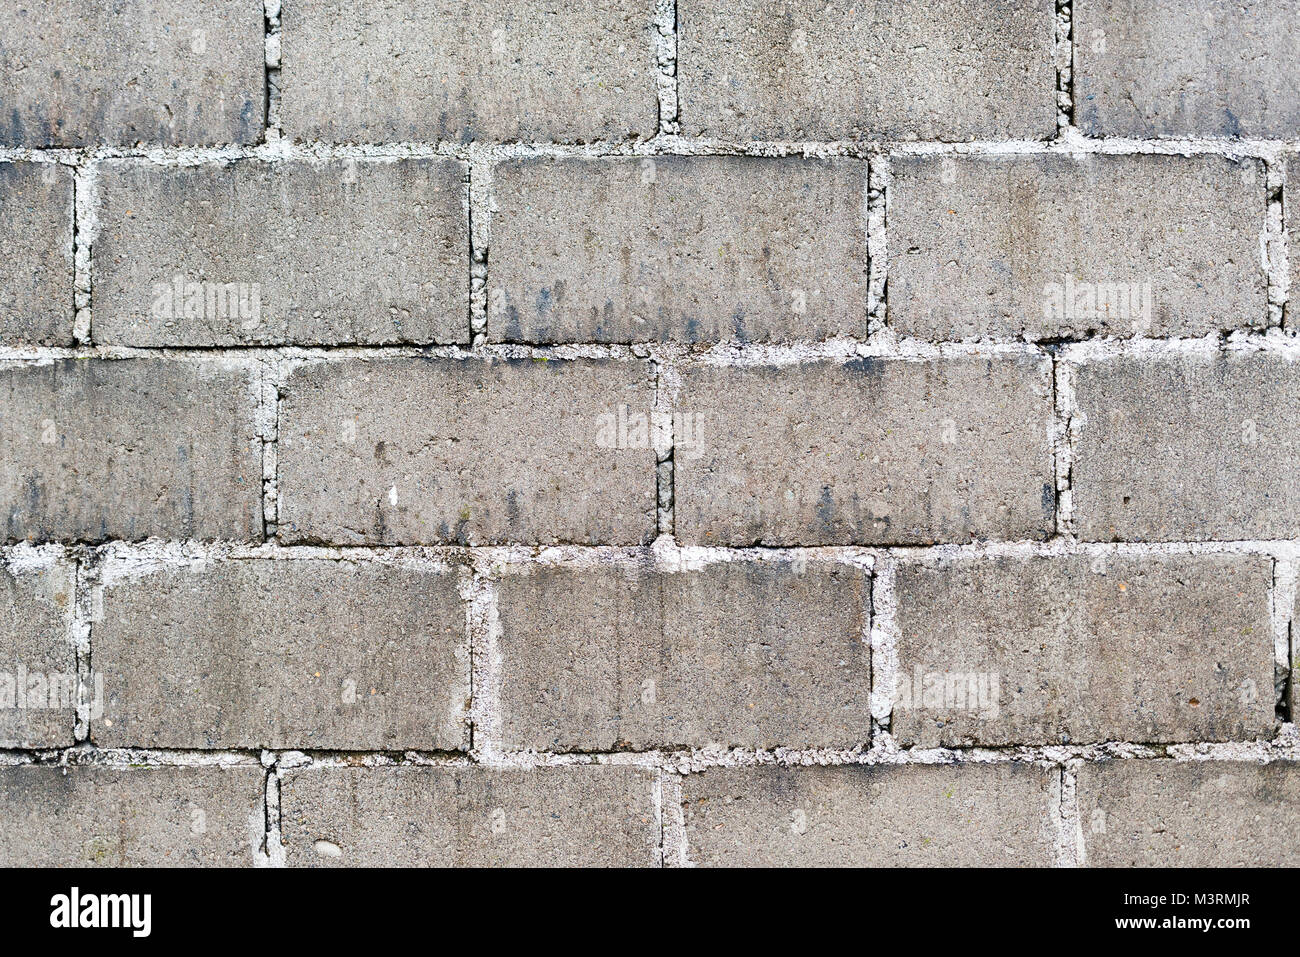 Old wall made from cinder blocks as background texture Stock Photo